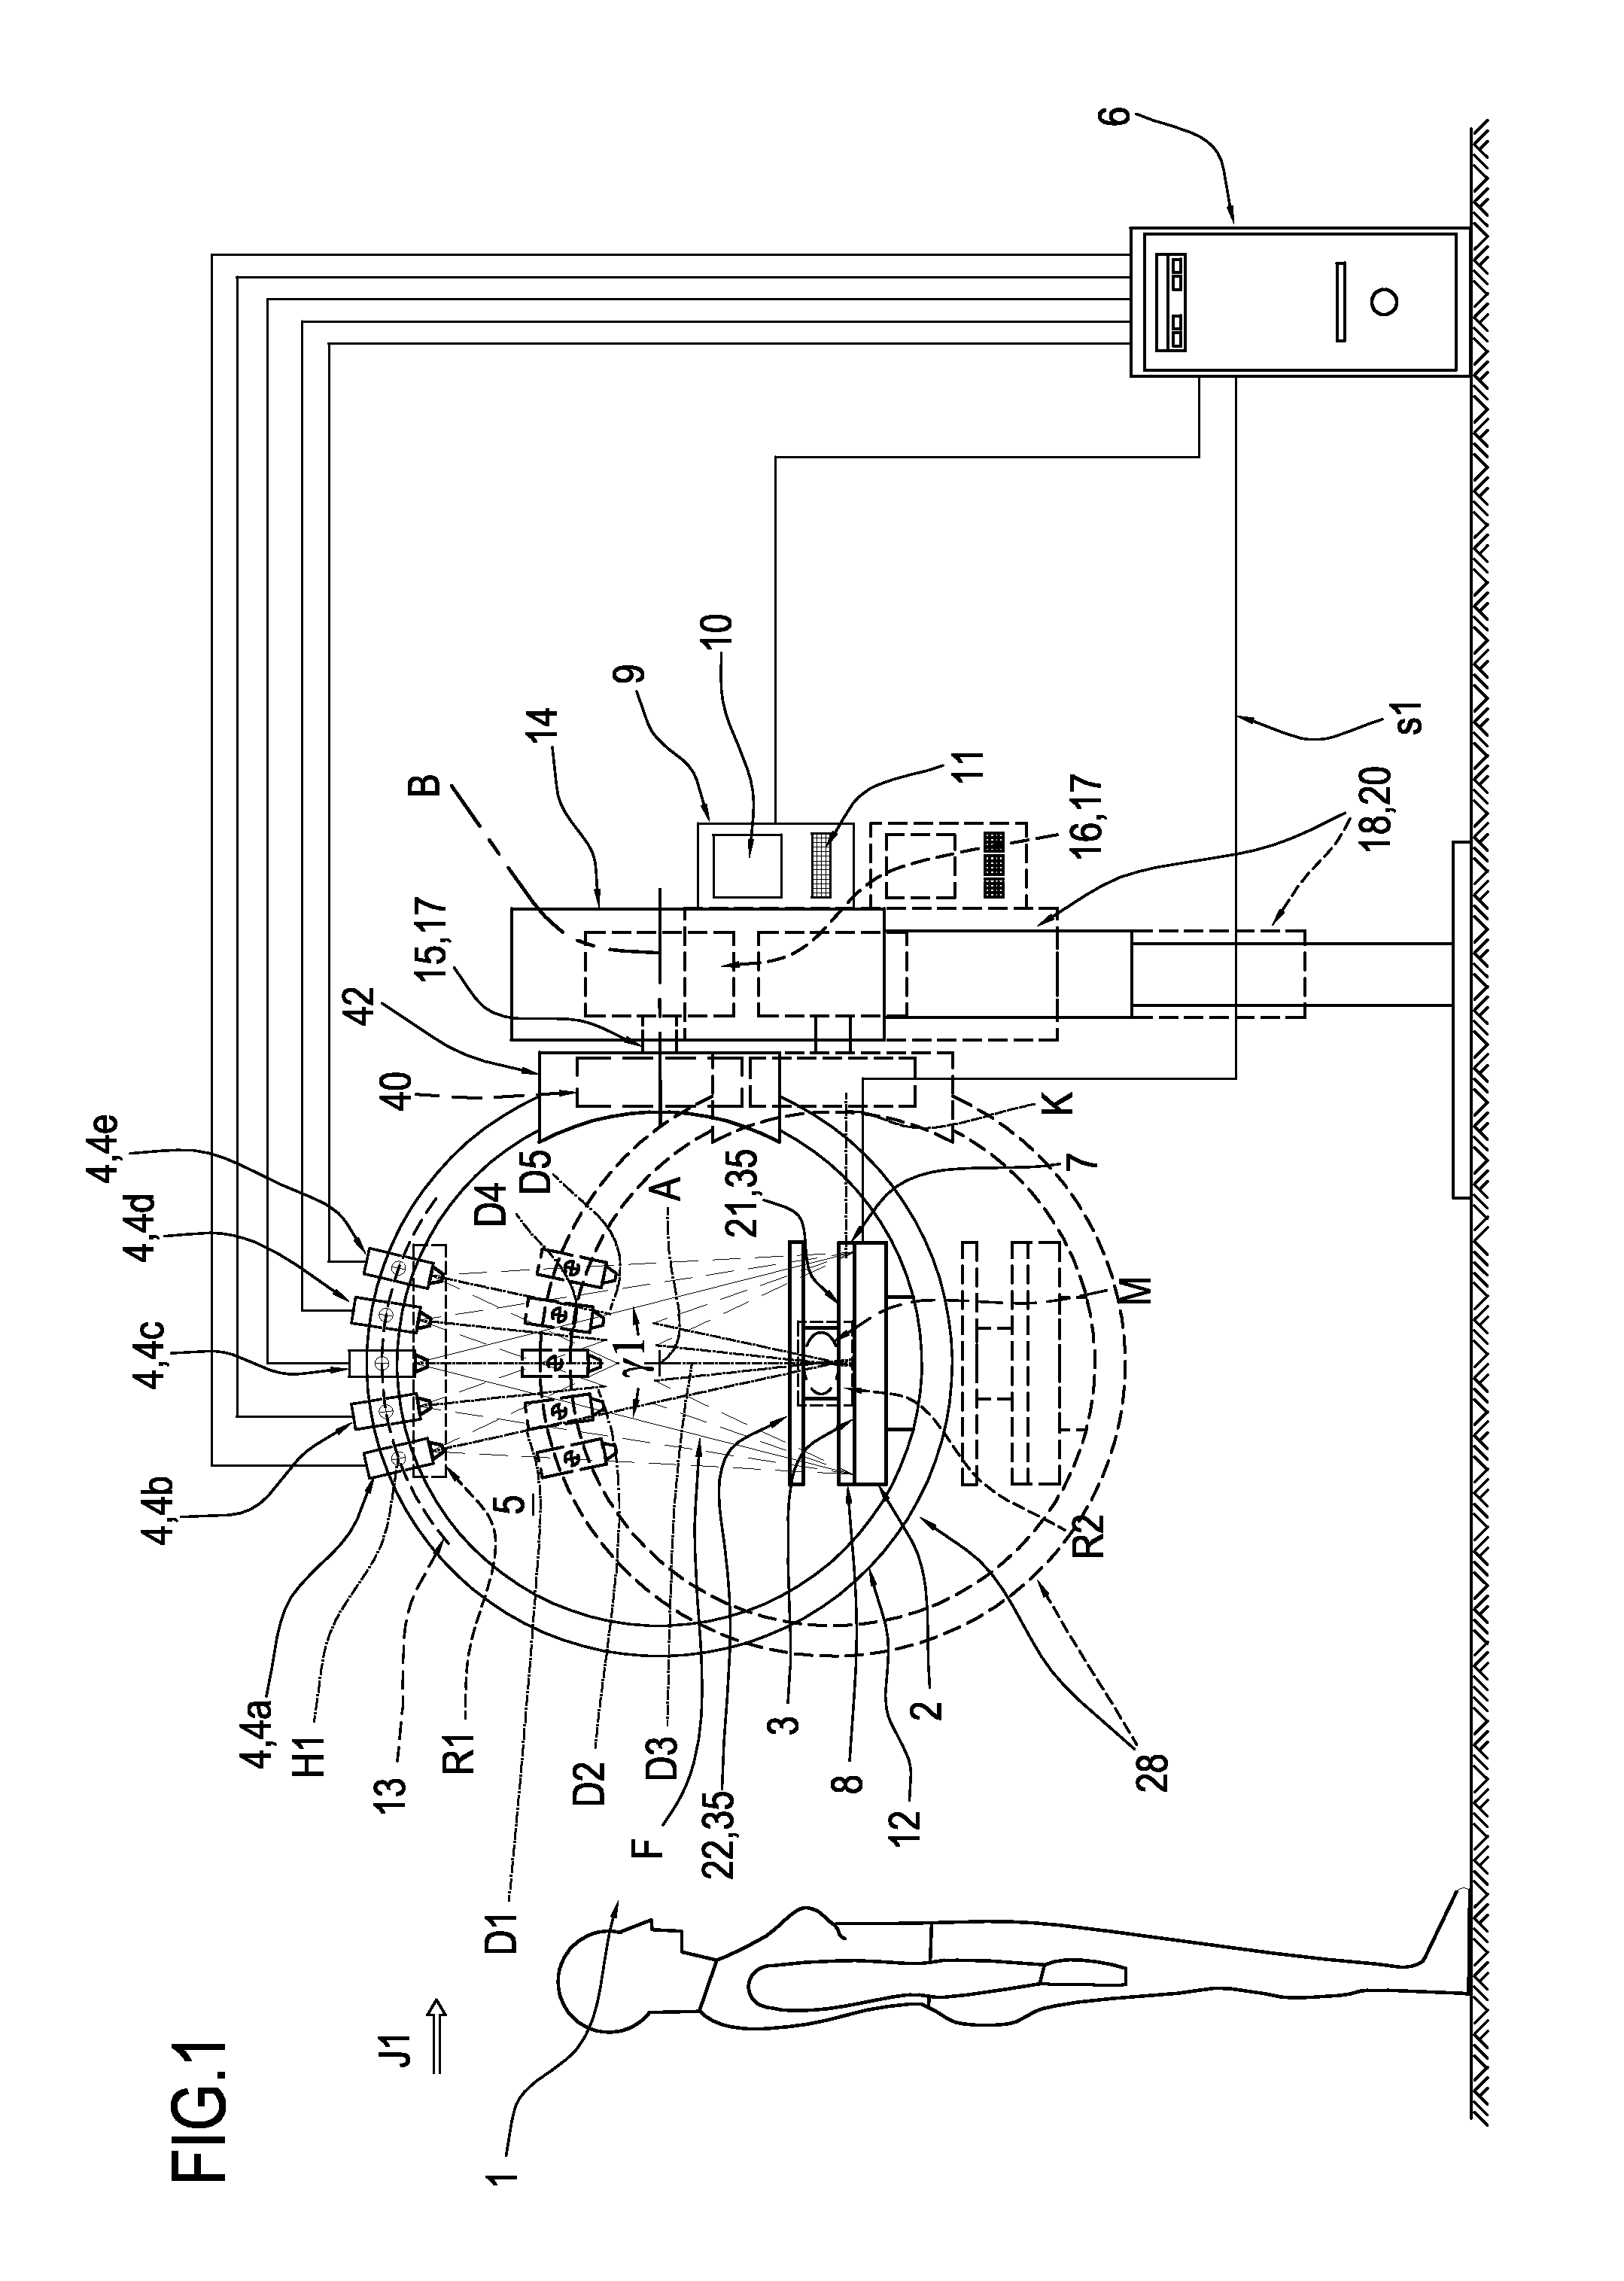 Apparatus for mammography and/or tomosynthesis with device for removing diffuse radiation